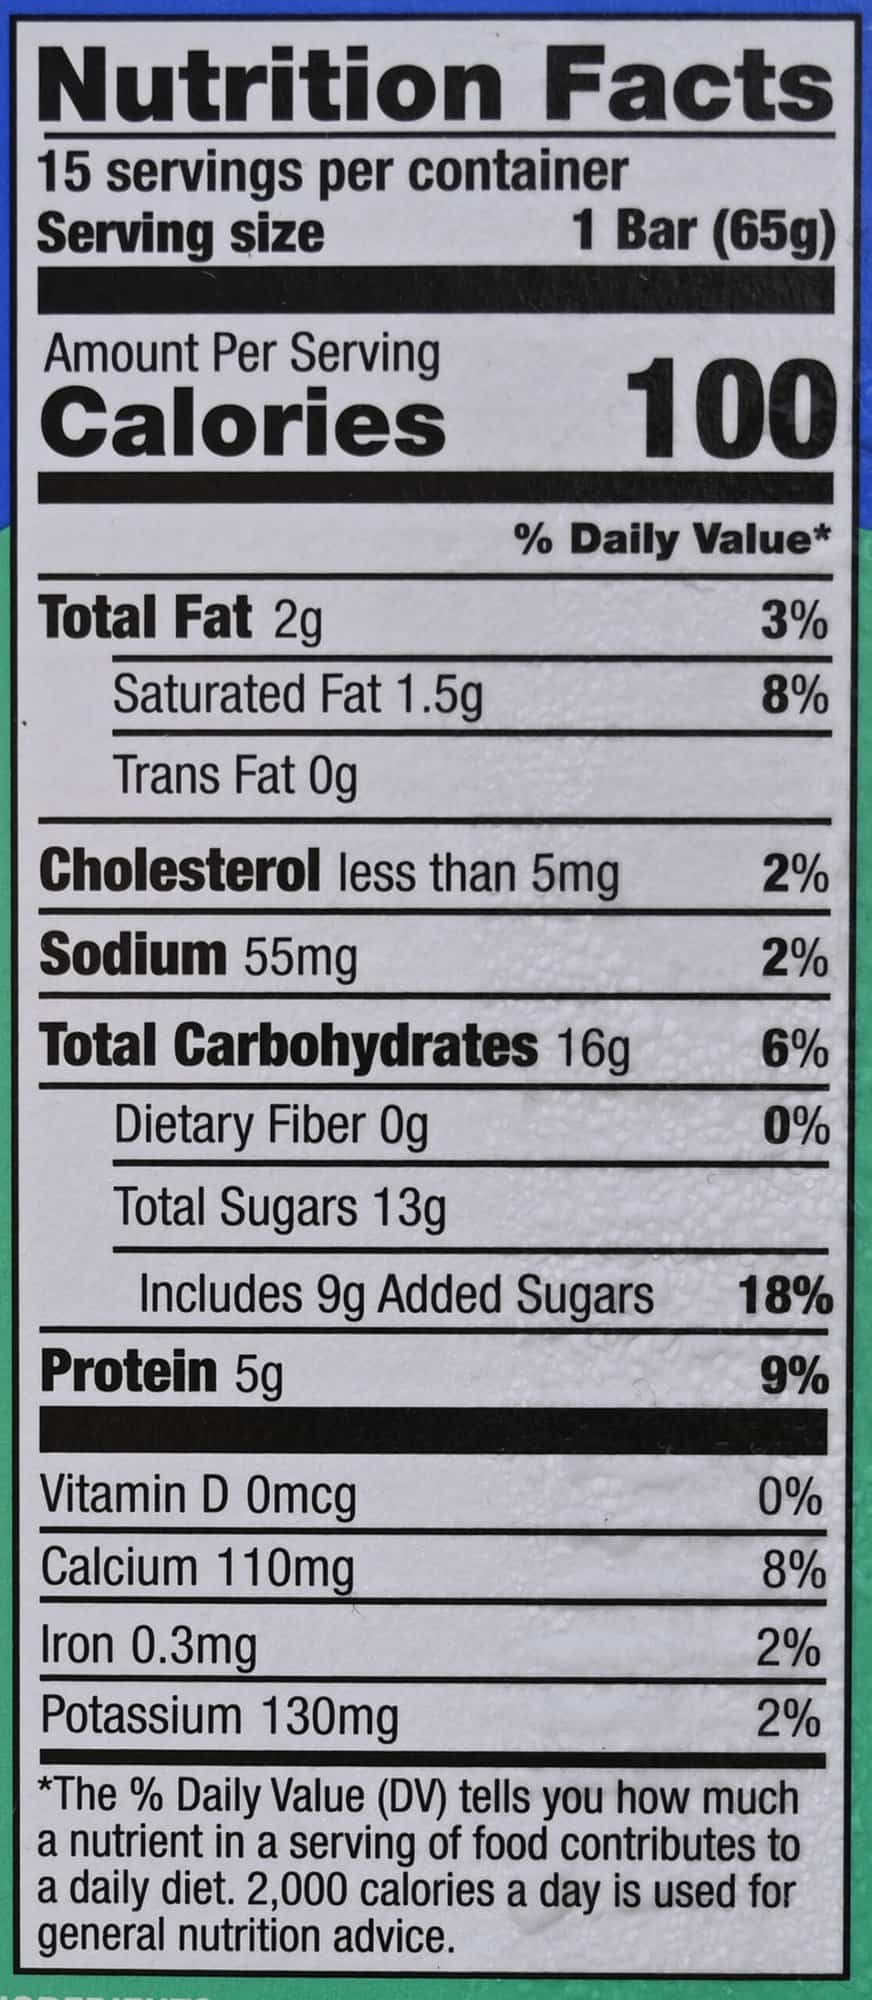 Image of the nutrition facts label for the Yasso Greek Yogurt Bars from the back of the box.